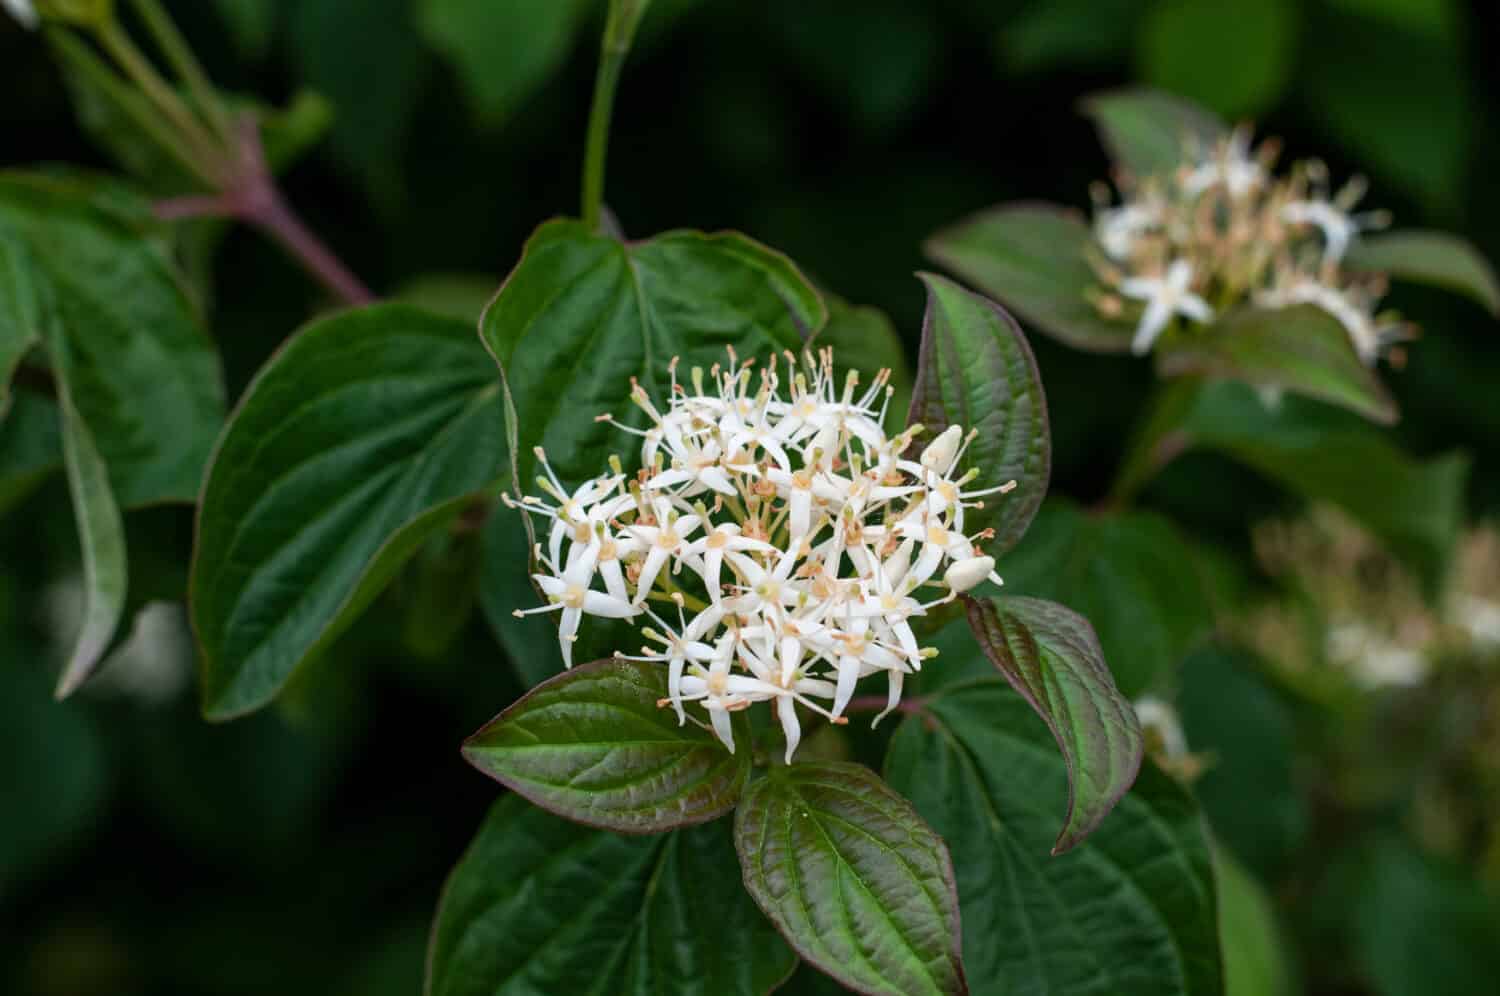 inflorescence of a roughleaf dogwood, cornus drummondii, with tiny white flowers